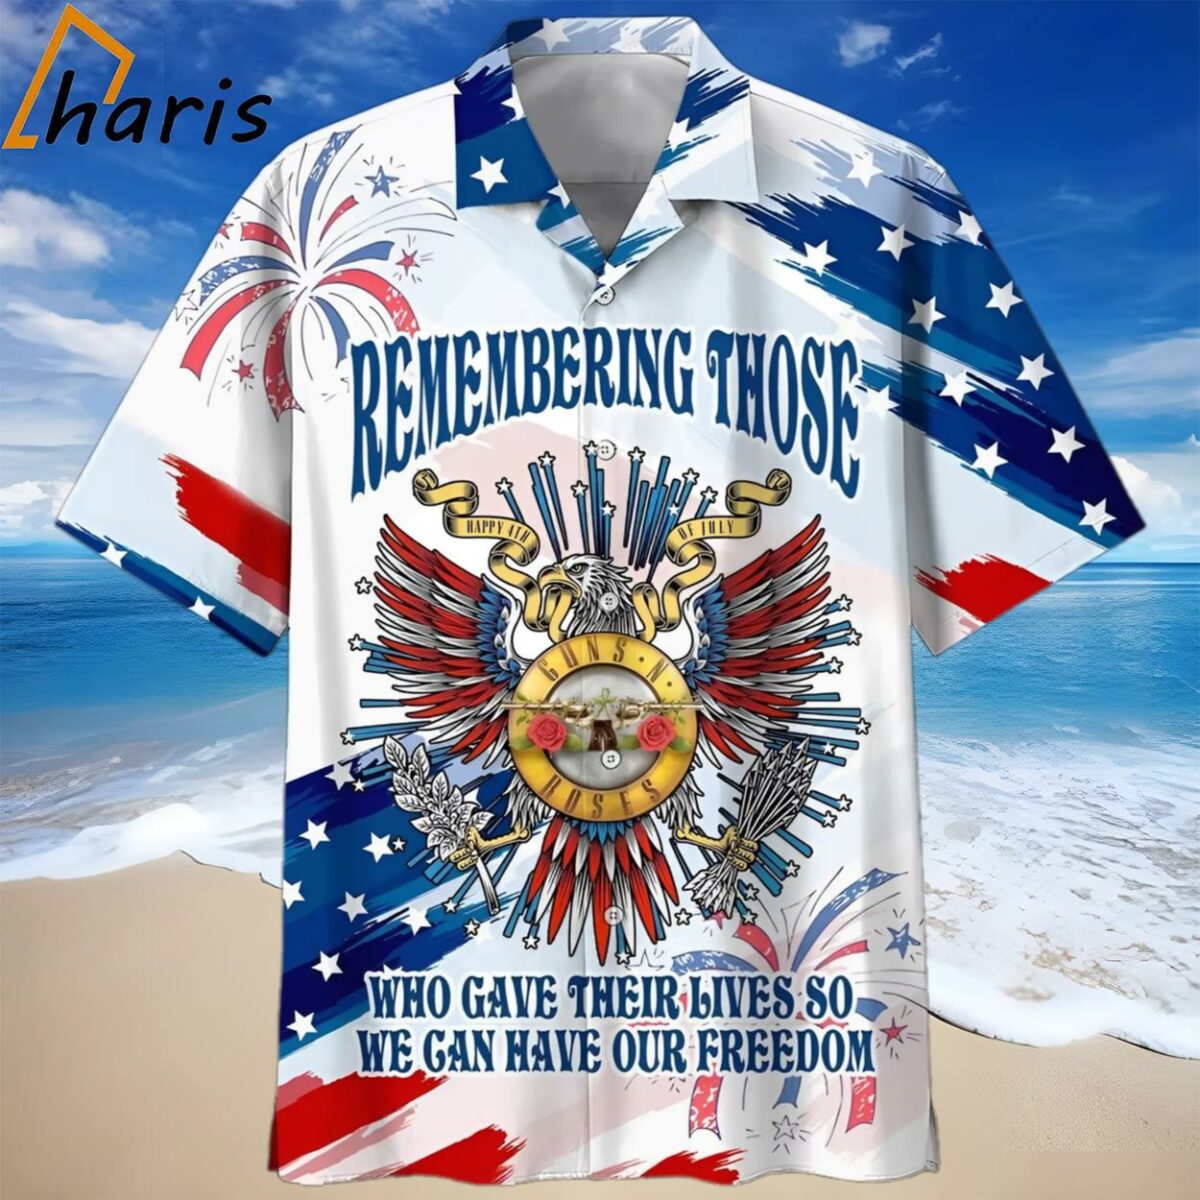 Guns N' Roses Remembering Those Who Gave Their Lives So We Can Have Our Freedom Hawaiian Shirt 1 1